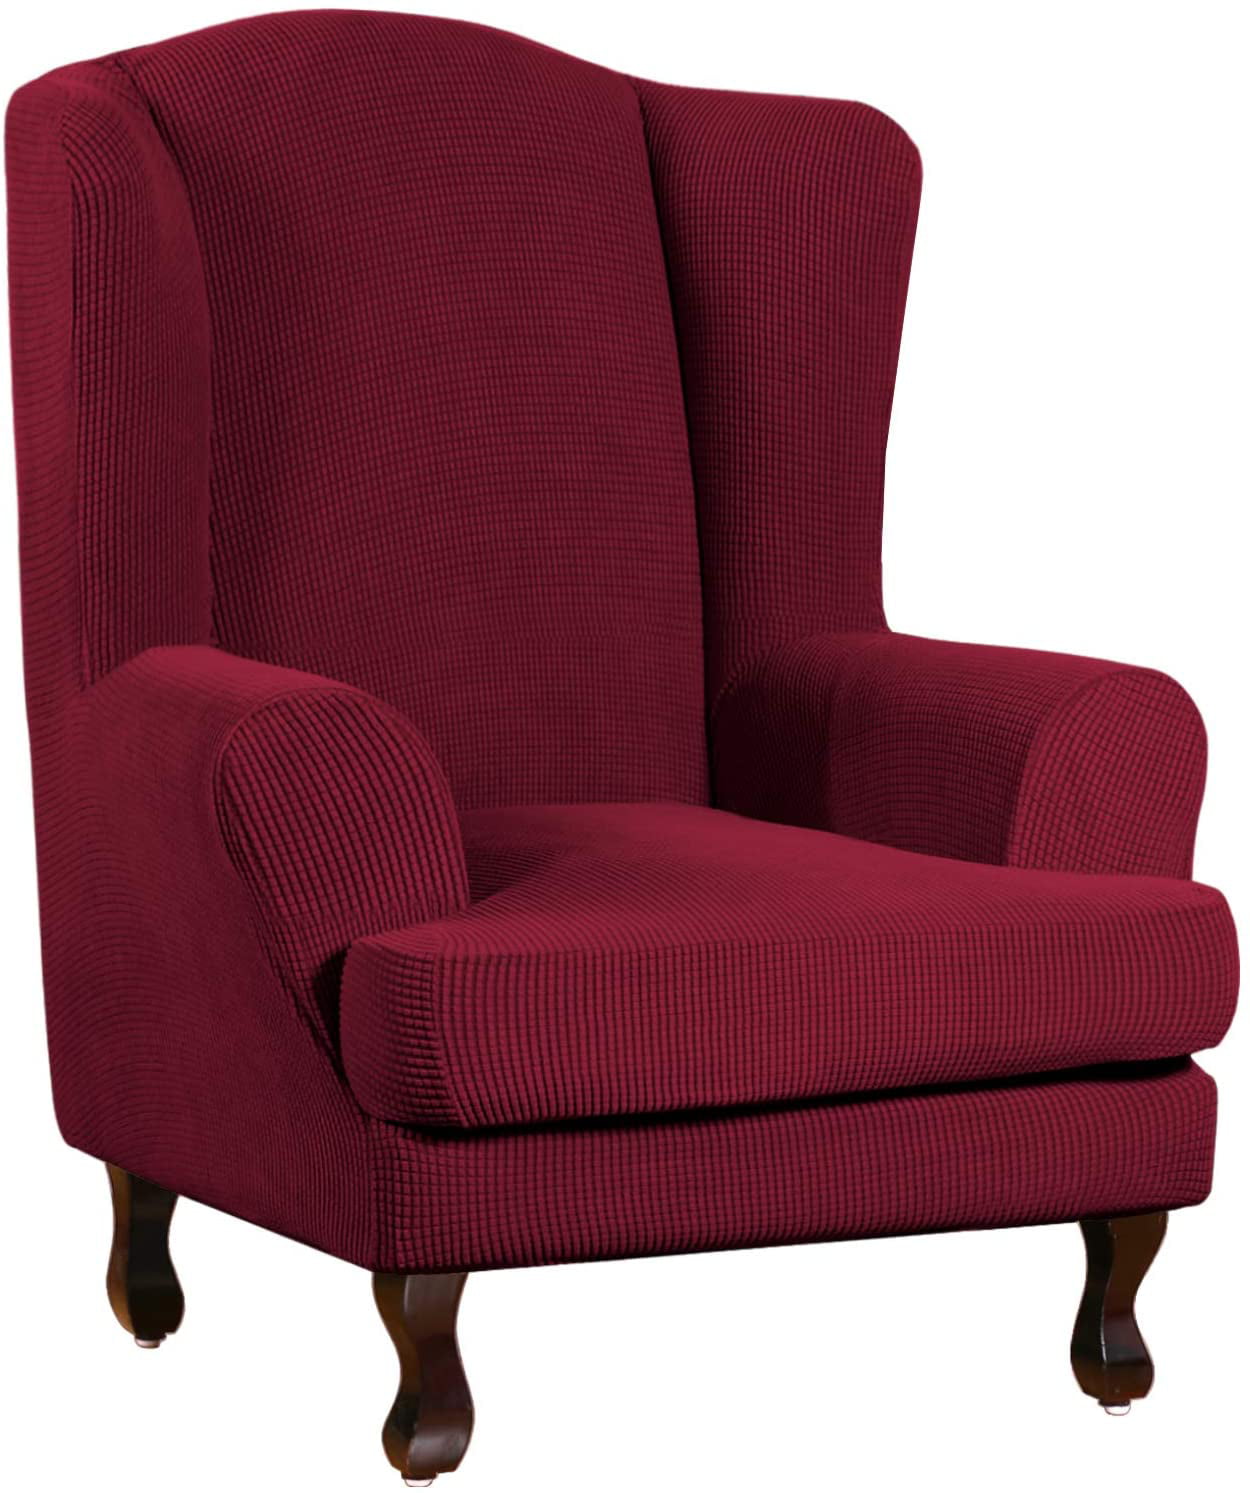 Details about   Floral Wingback Slipcover Stretch Wing Chair Armchair Slip Cover Couch protector 